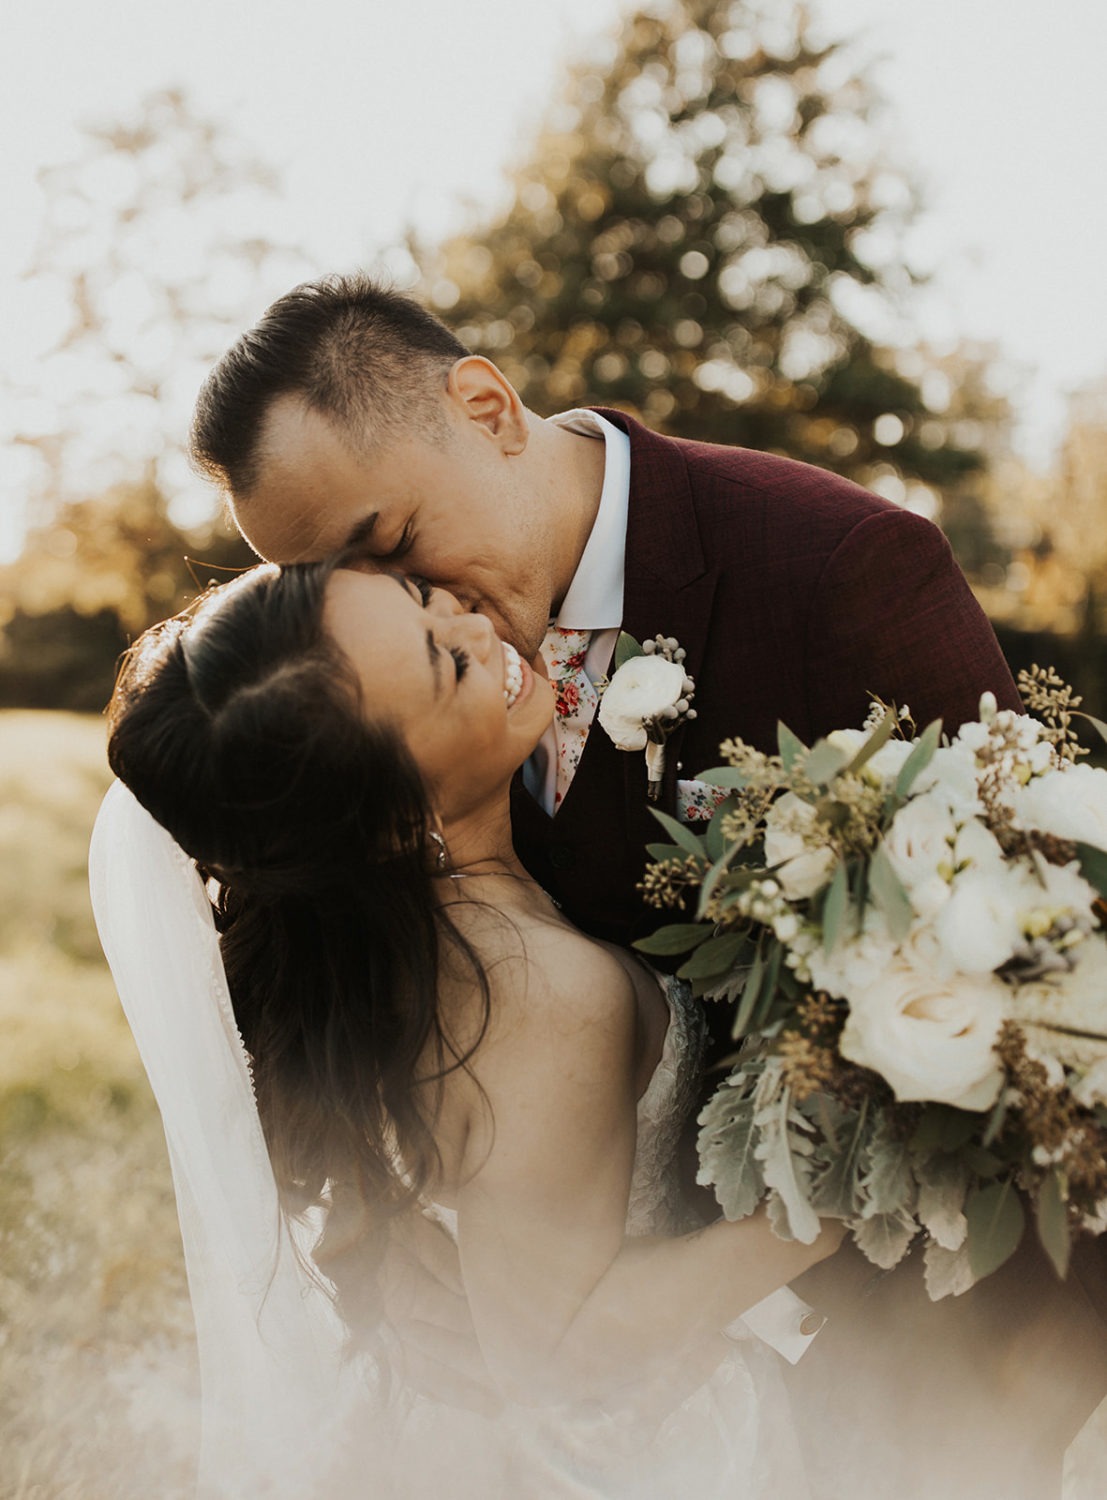 Couple kisses while holding wedding bouquet at wedding vow renewals